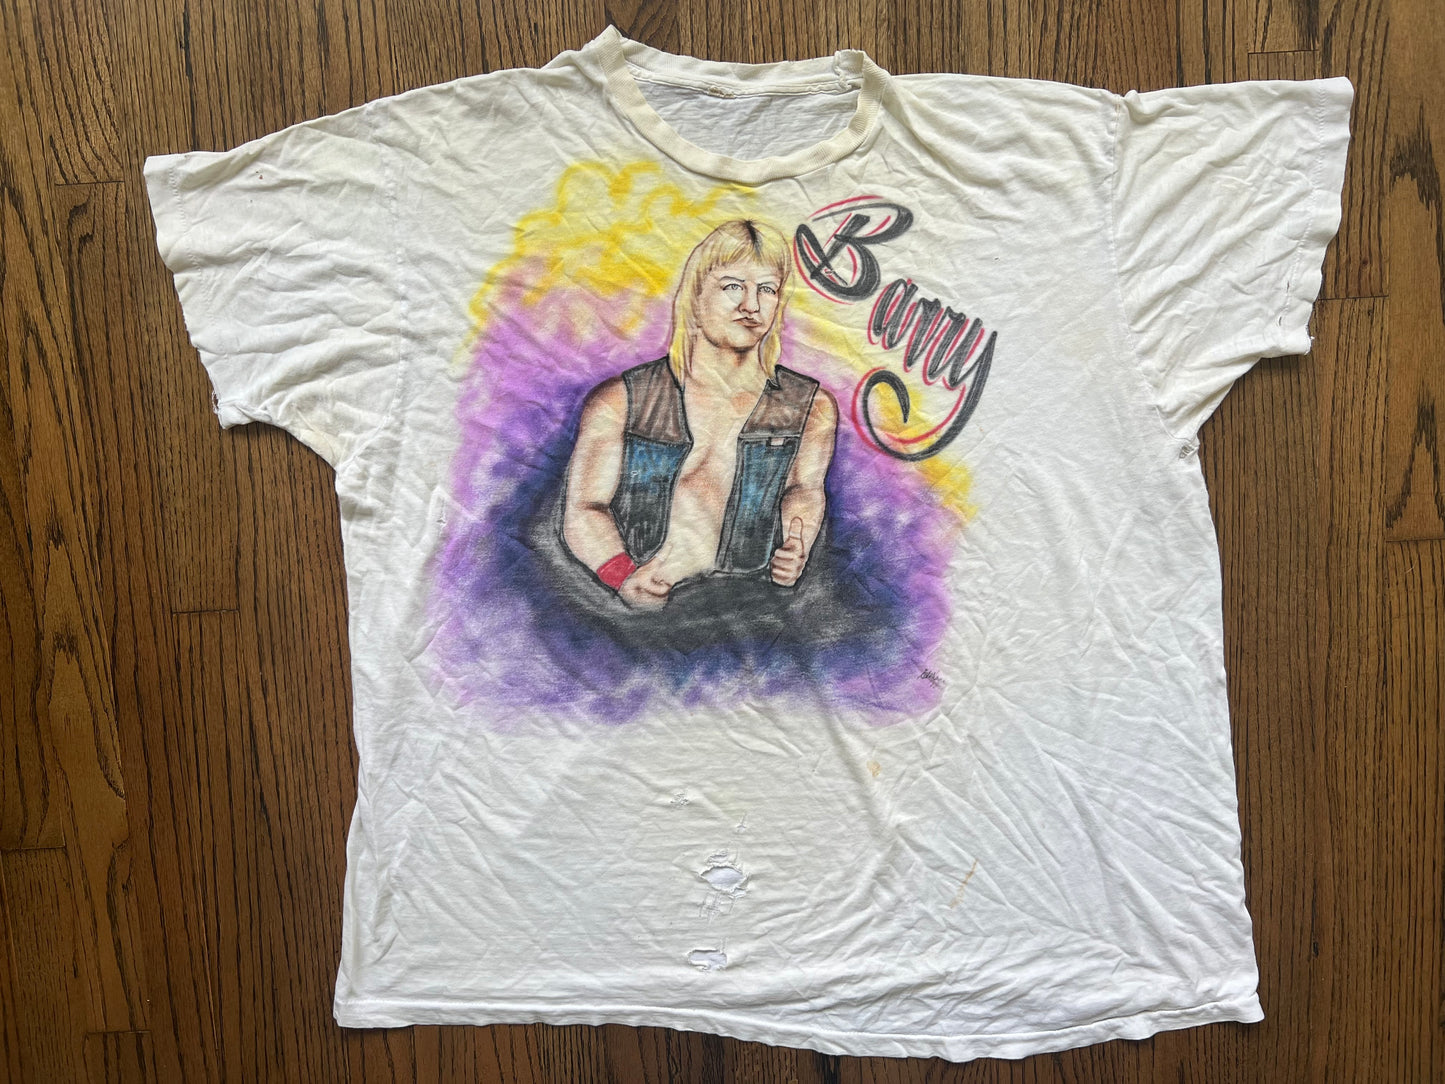 1988 Barry Windham airbrushed shirt